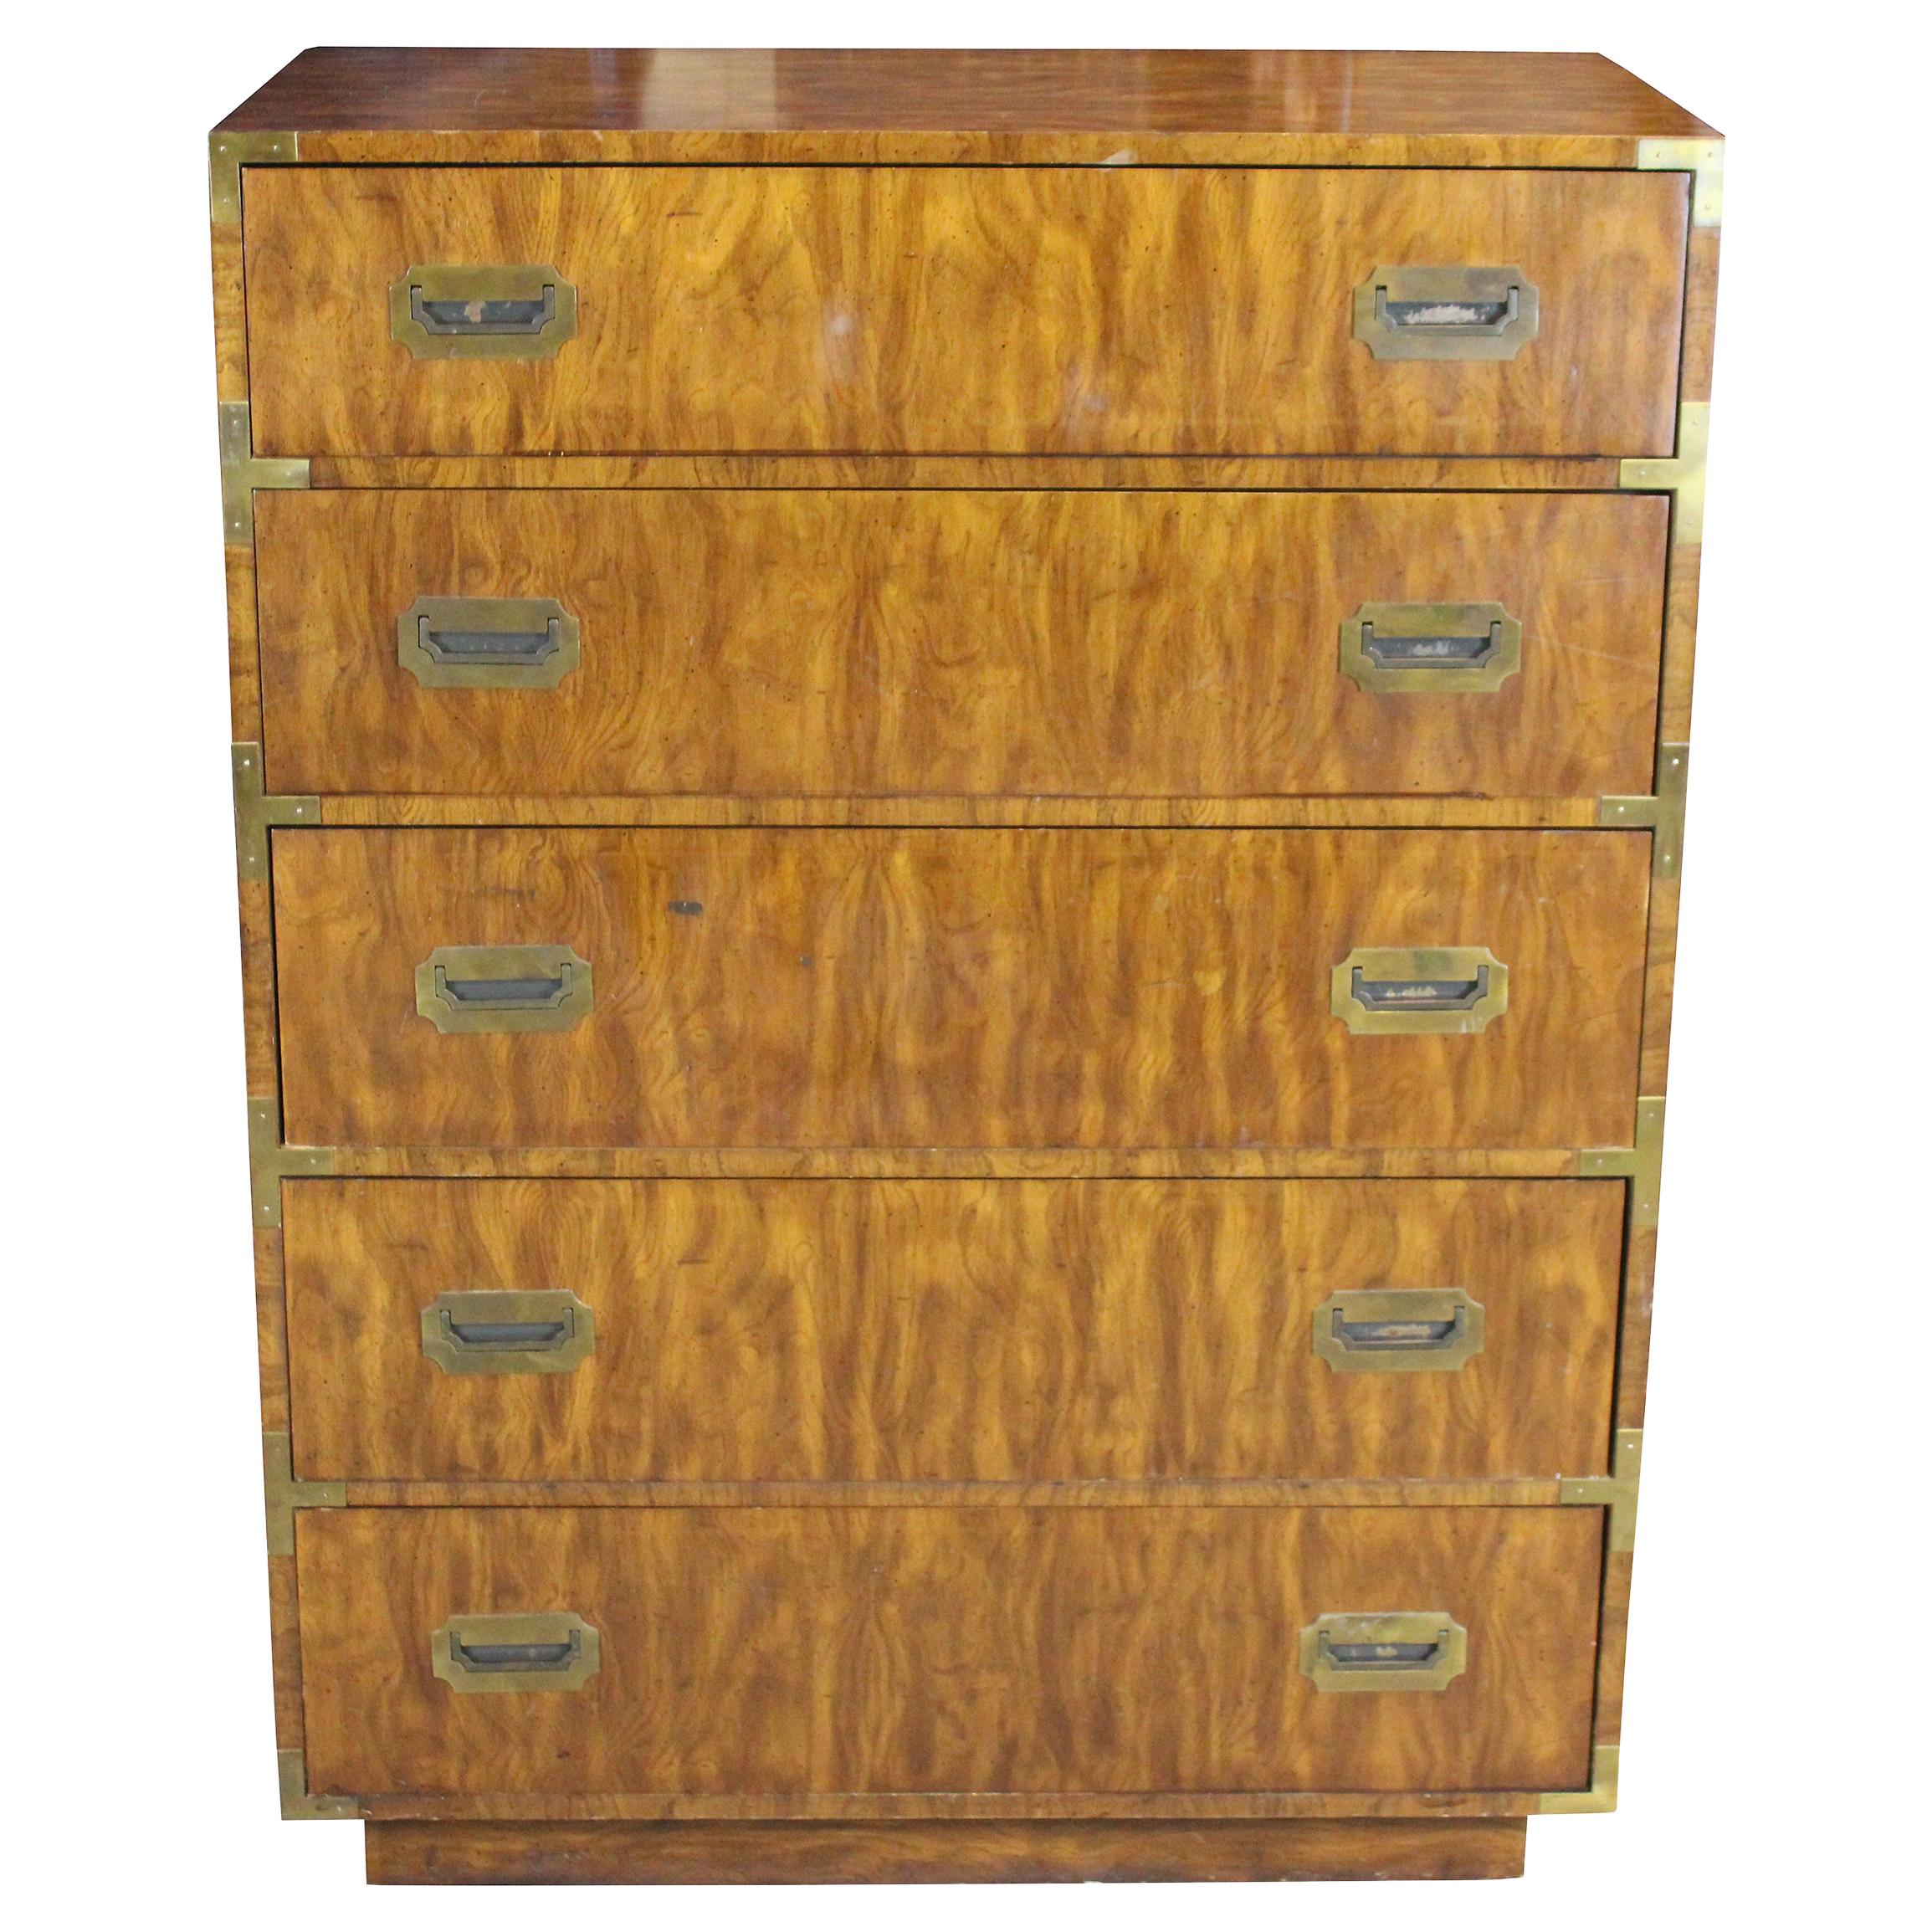 1975 Dixie Campaigner Walnut Highboy Chest of Drawers Campaign Dresser MCM 545